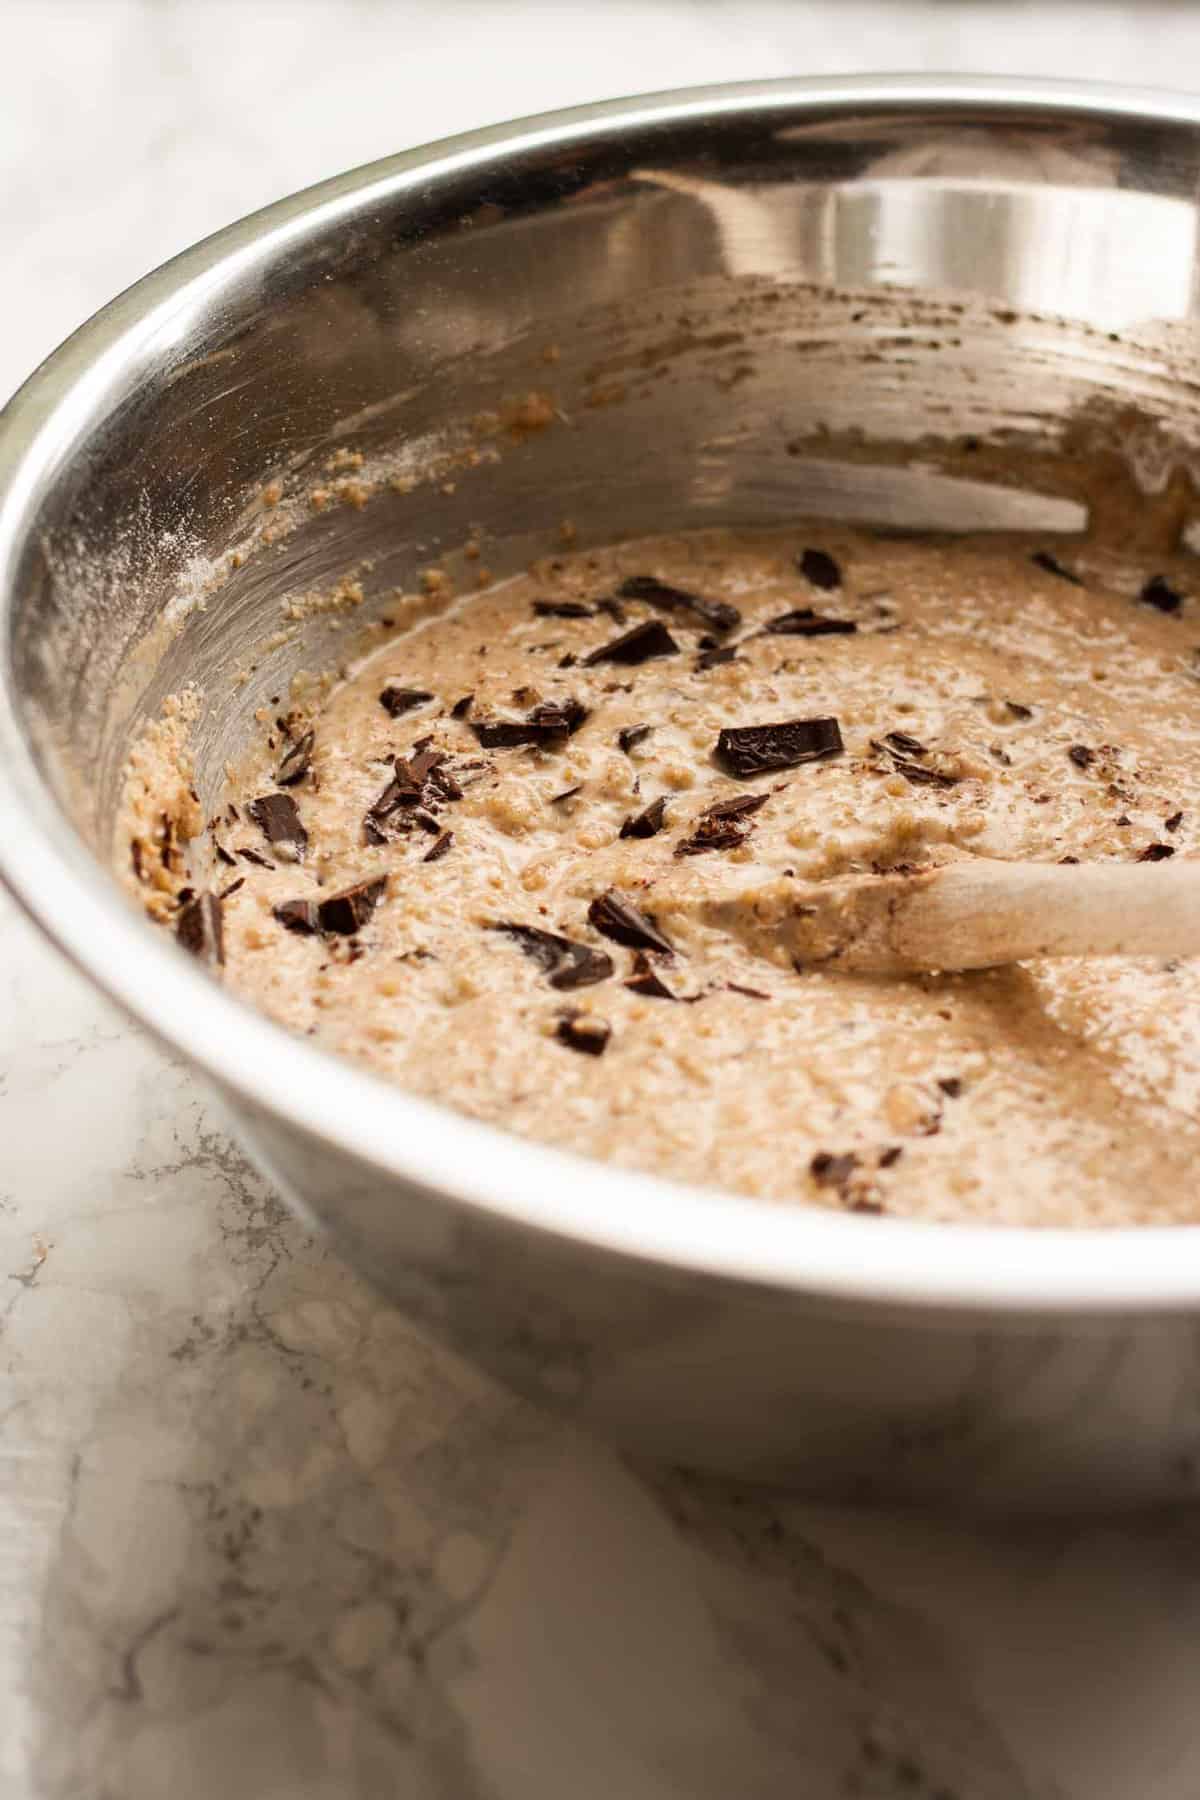 A bowl of muffin batter with a spoon and chocolate chunks inside.